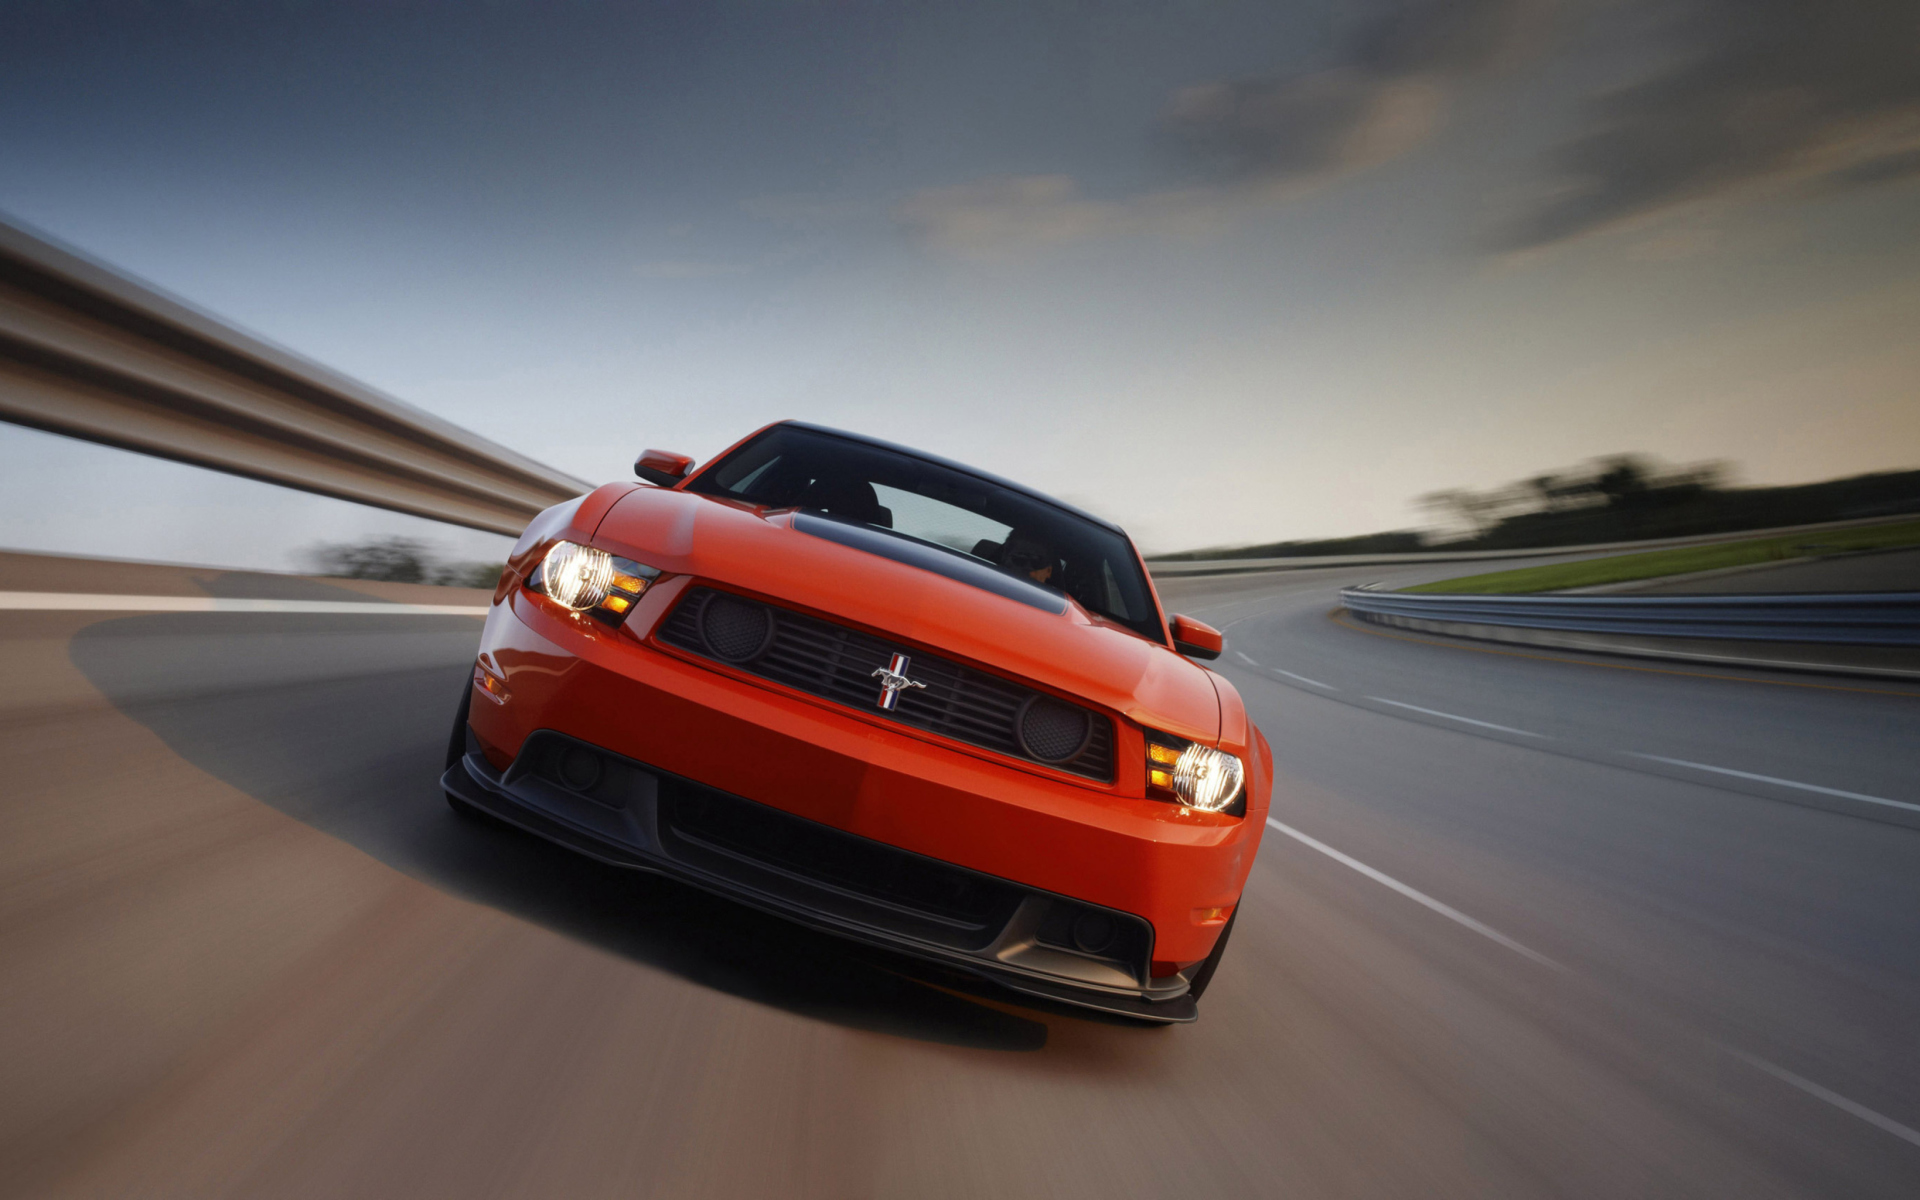 Red Cars Ford Mustang wallpaper 1920x1200